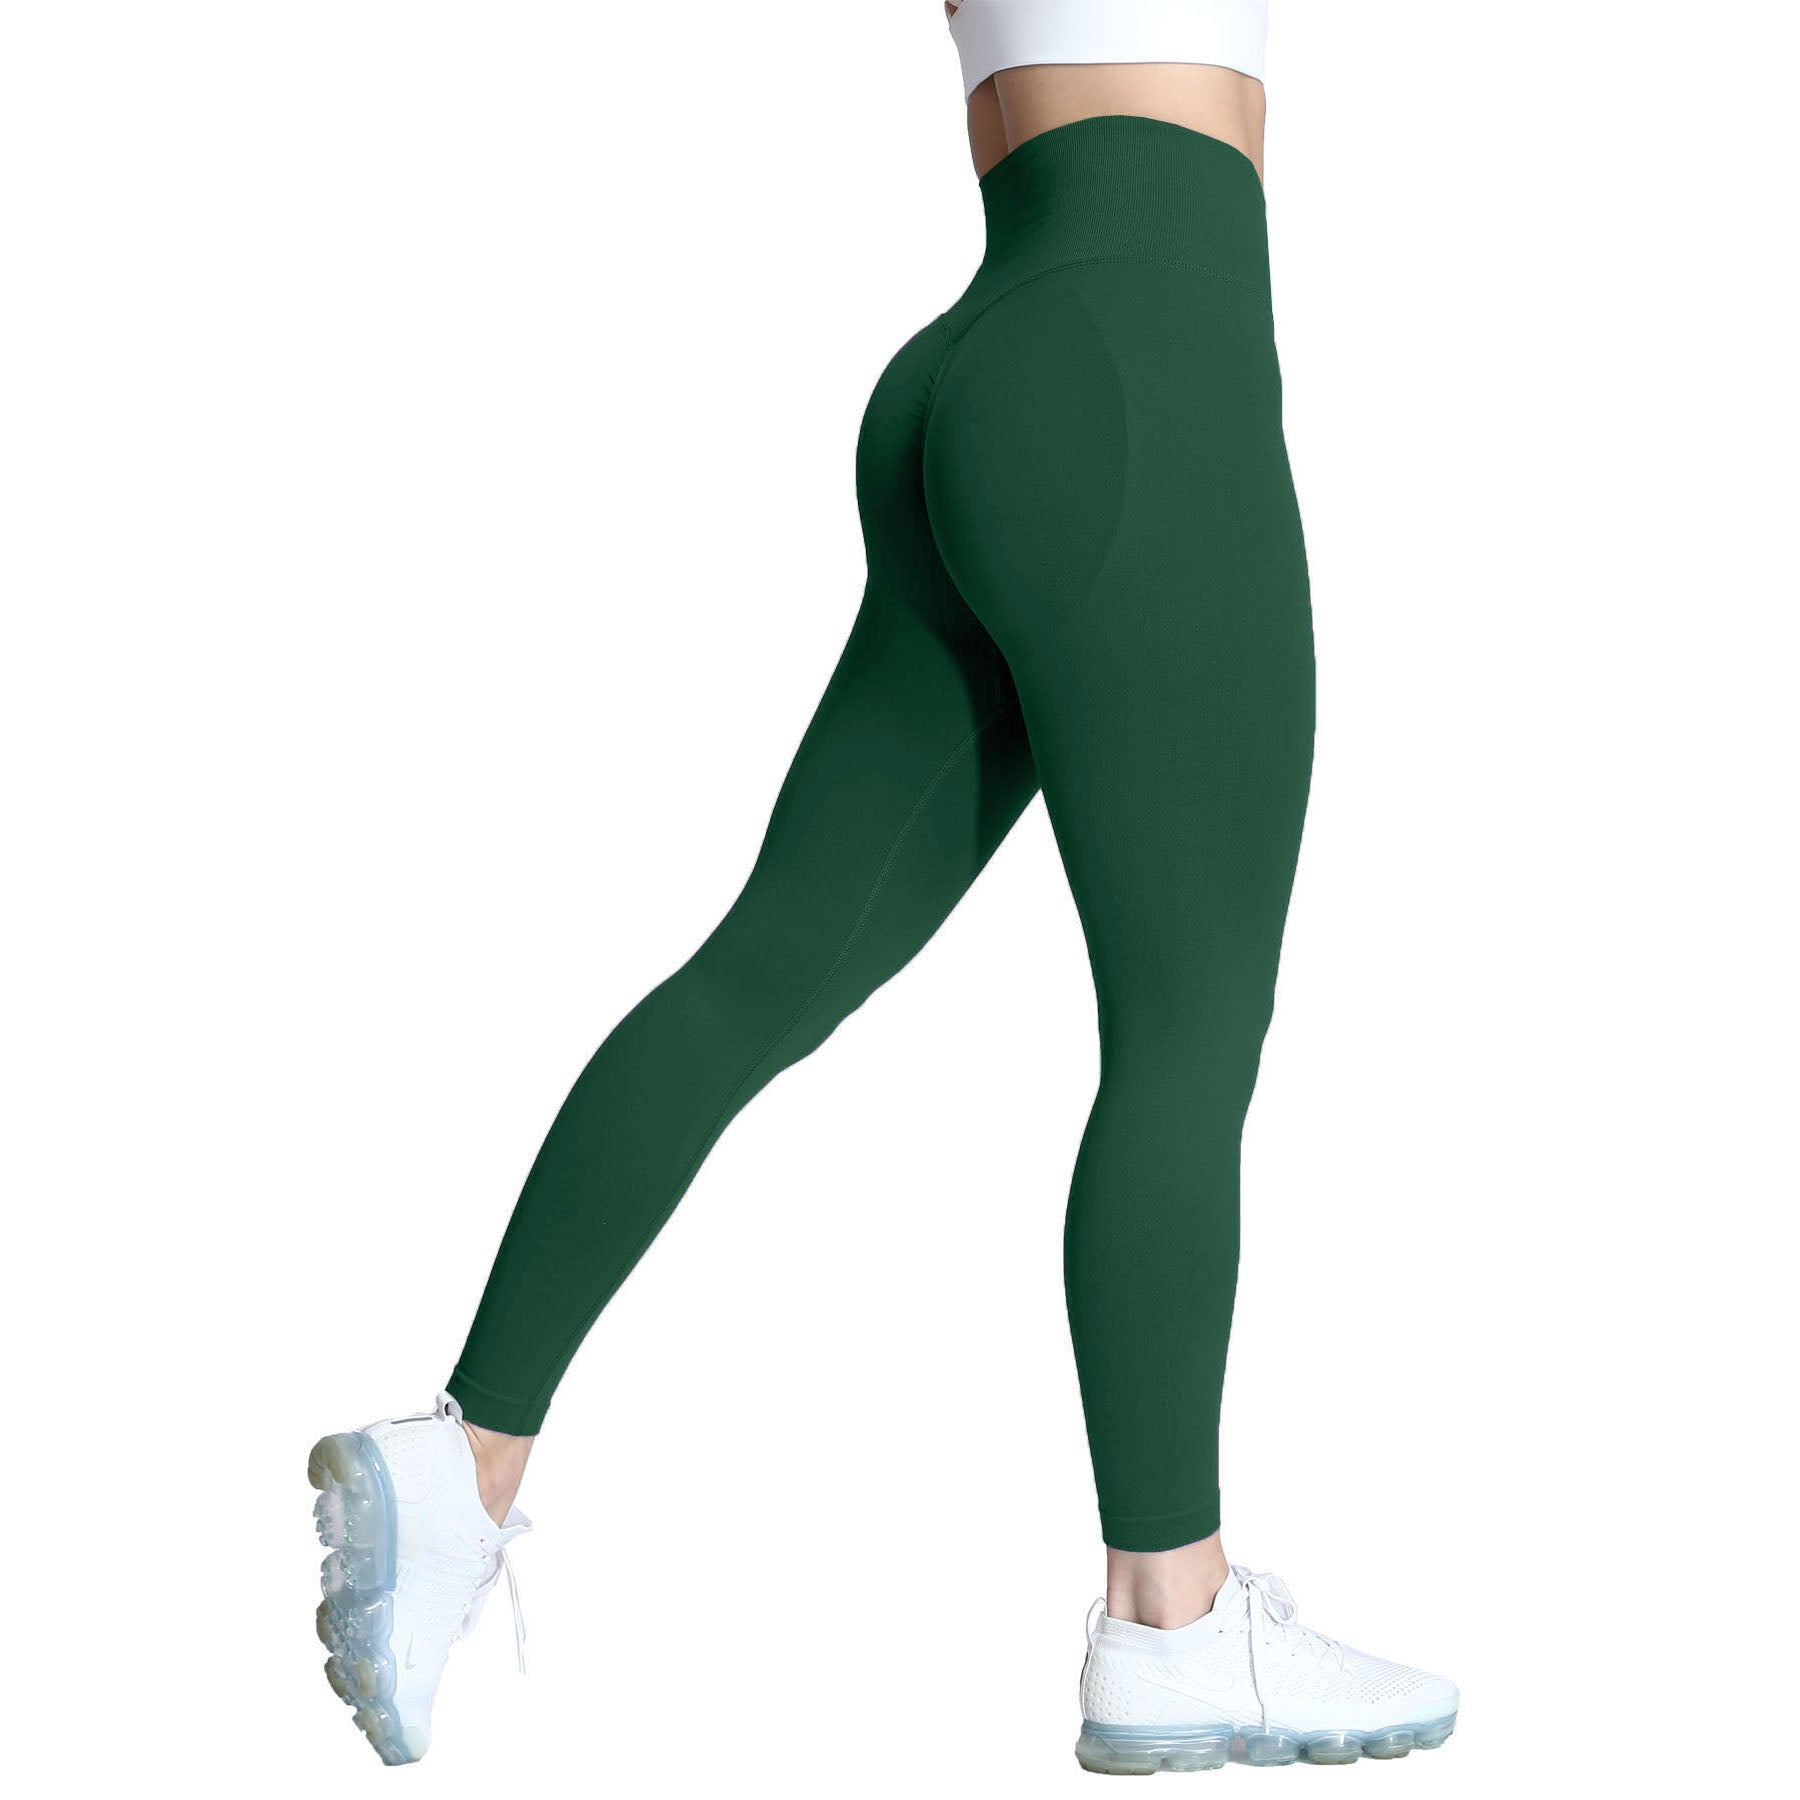  Aoxjox Seamless Leggings for Women Adapt Marl High Waist Workout  Yoga Pants (Emerald Green Marl, Large) : Clothing, Shoes & Jewelry